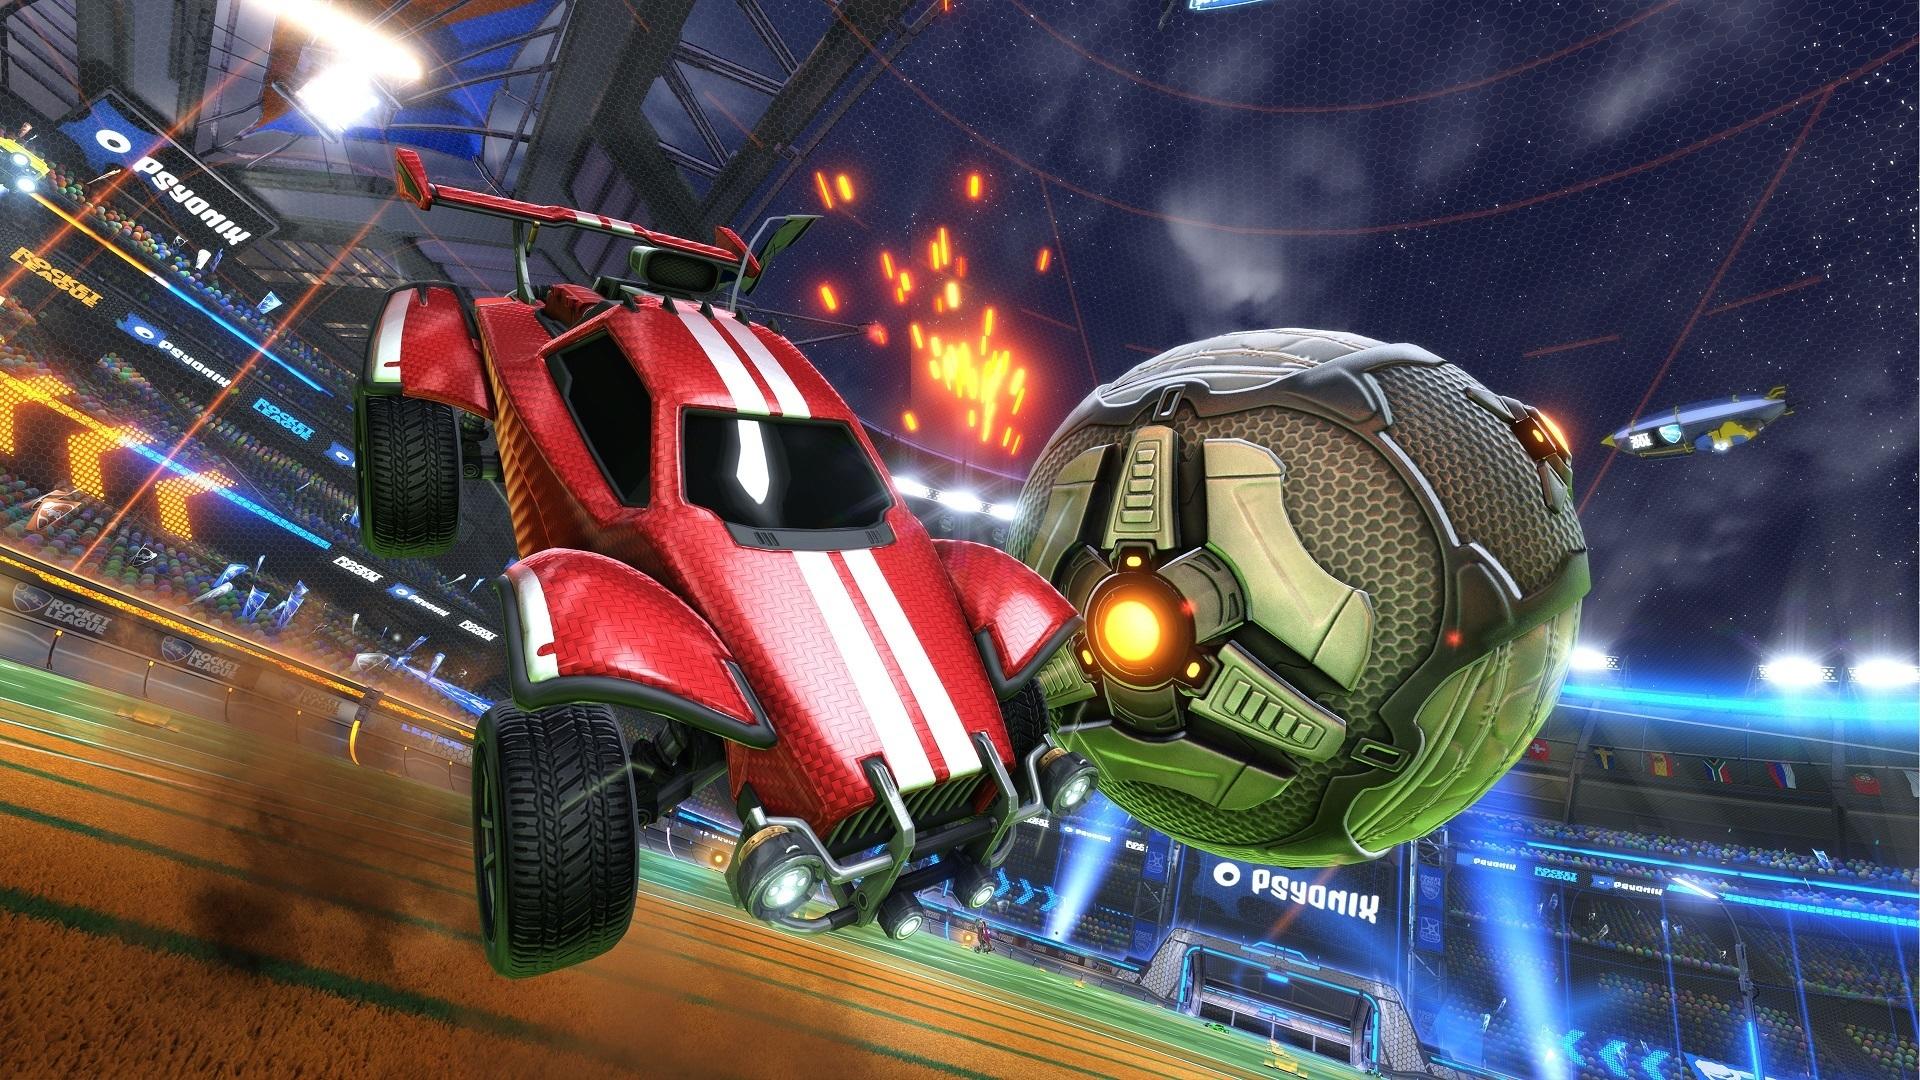 Rocket League is another lovely feather in Epic's already plush cap